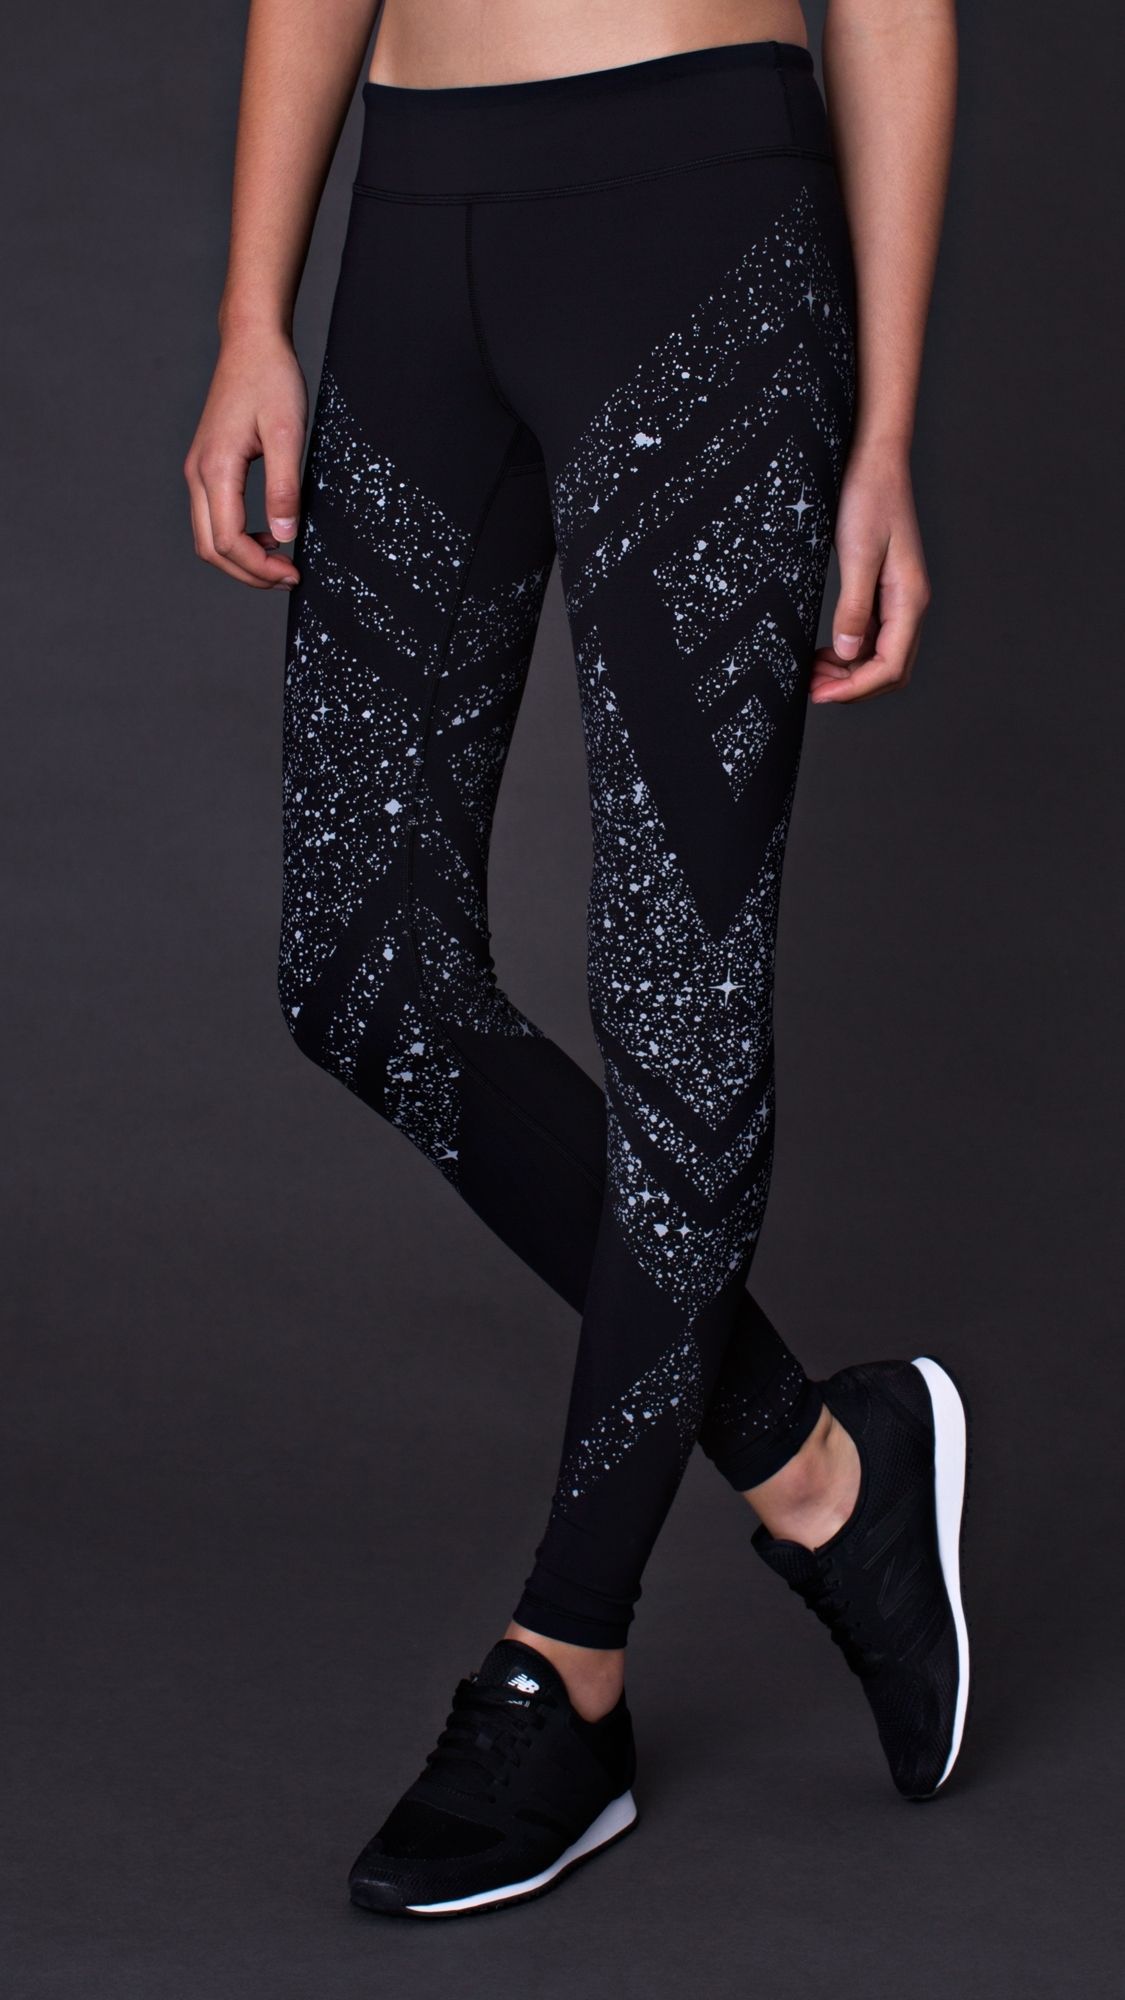 Moon Gem Collection.  Light the way with this inspiring print in the classic style you love. Be strong, be stellar. | Rhythmic